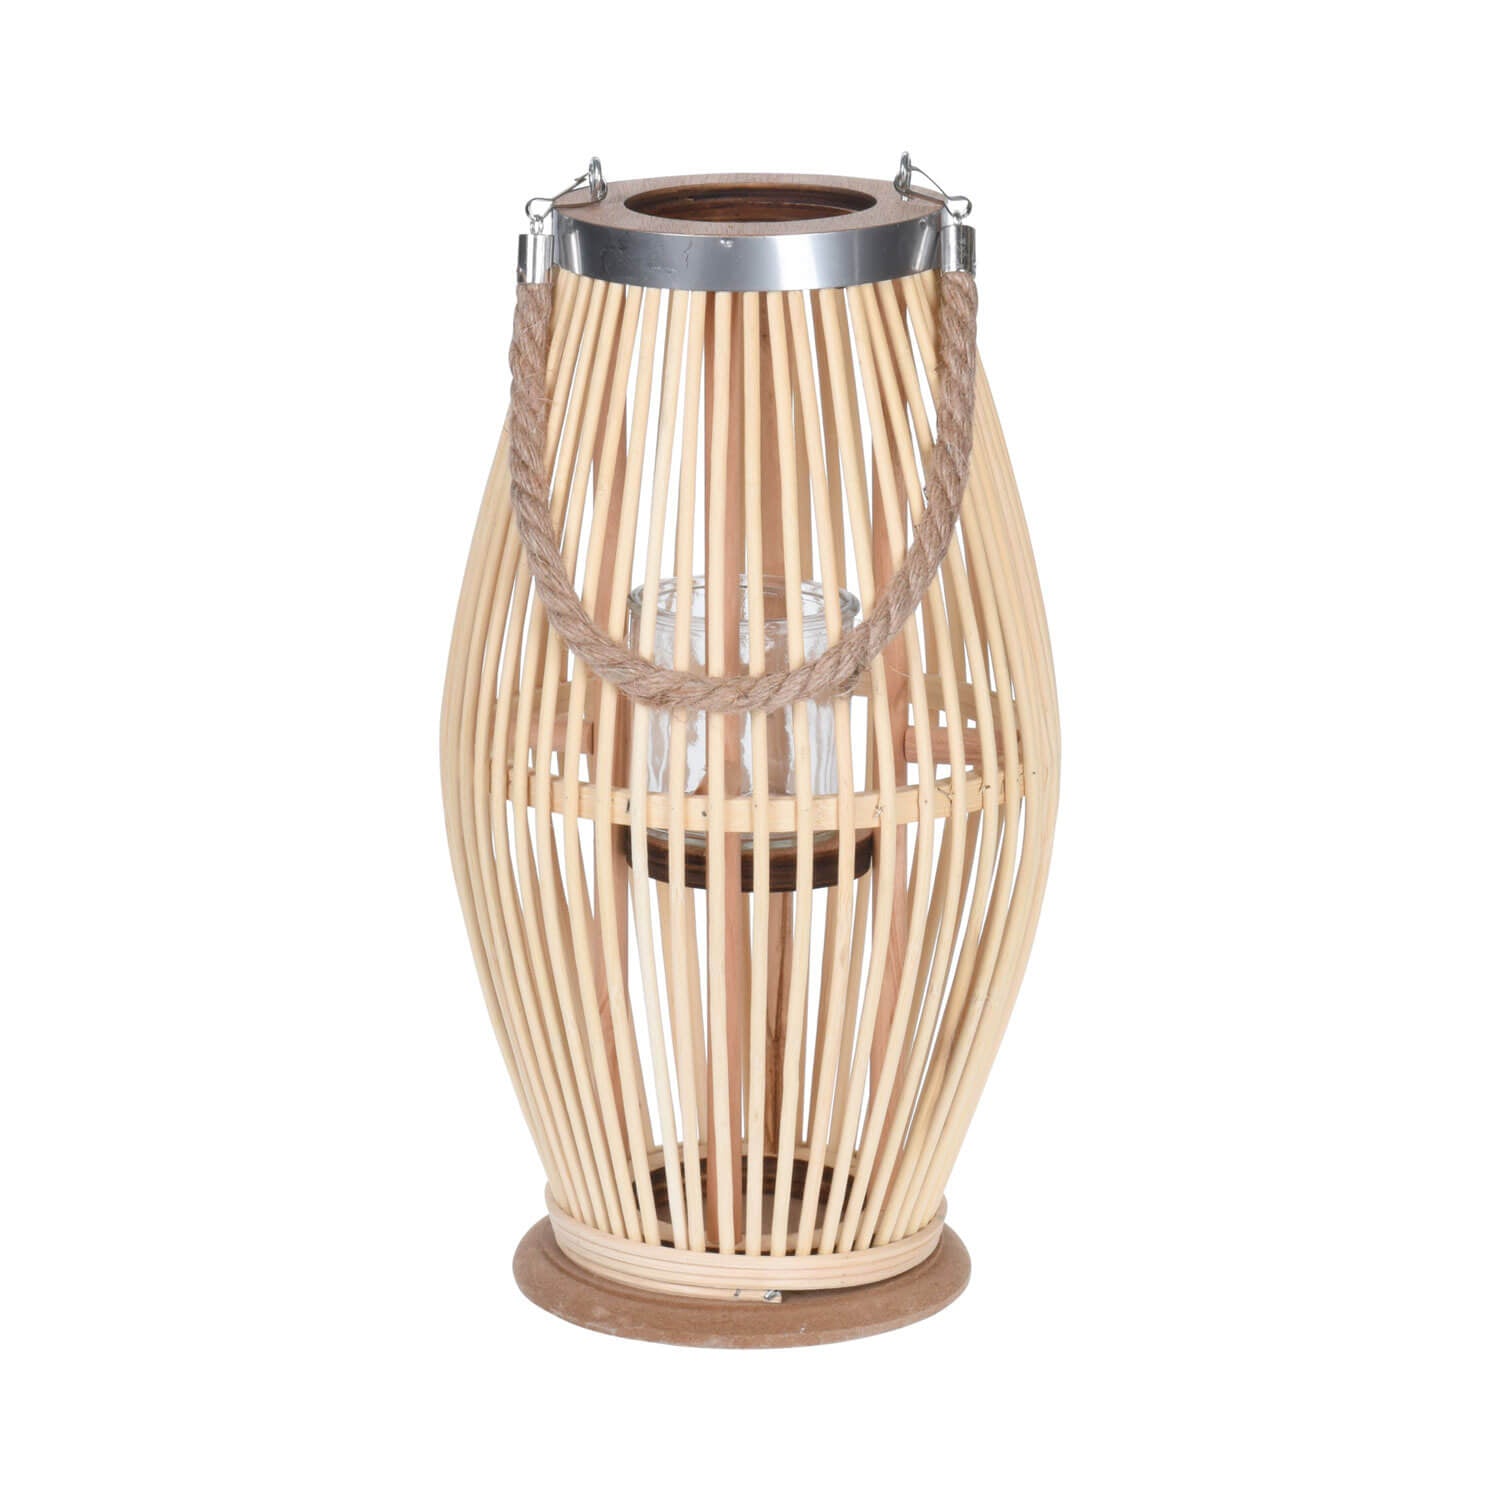 The Home Collection Bamboo Lantern 1 Shaws Department Stores